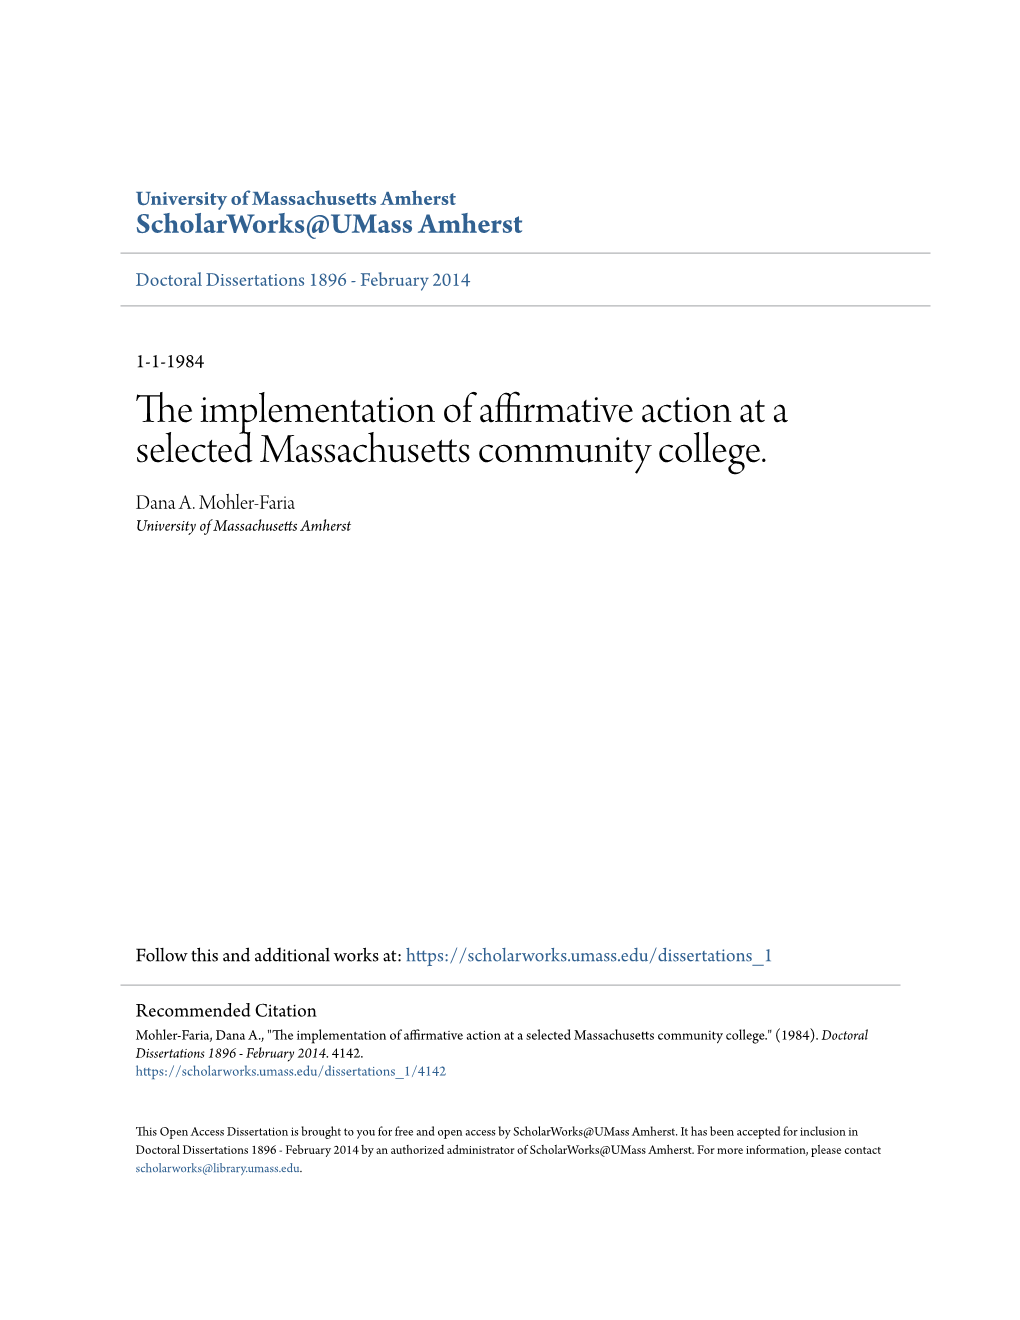 The Implementation of Affirmative Action at a Selected Massachusetts Community College